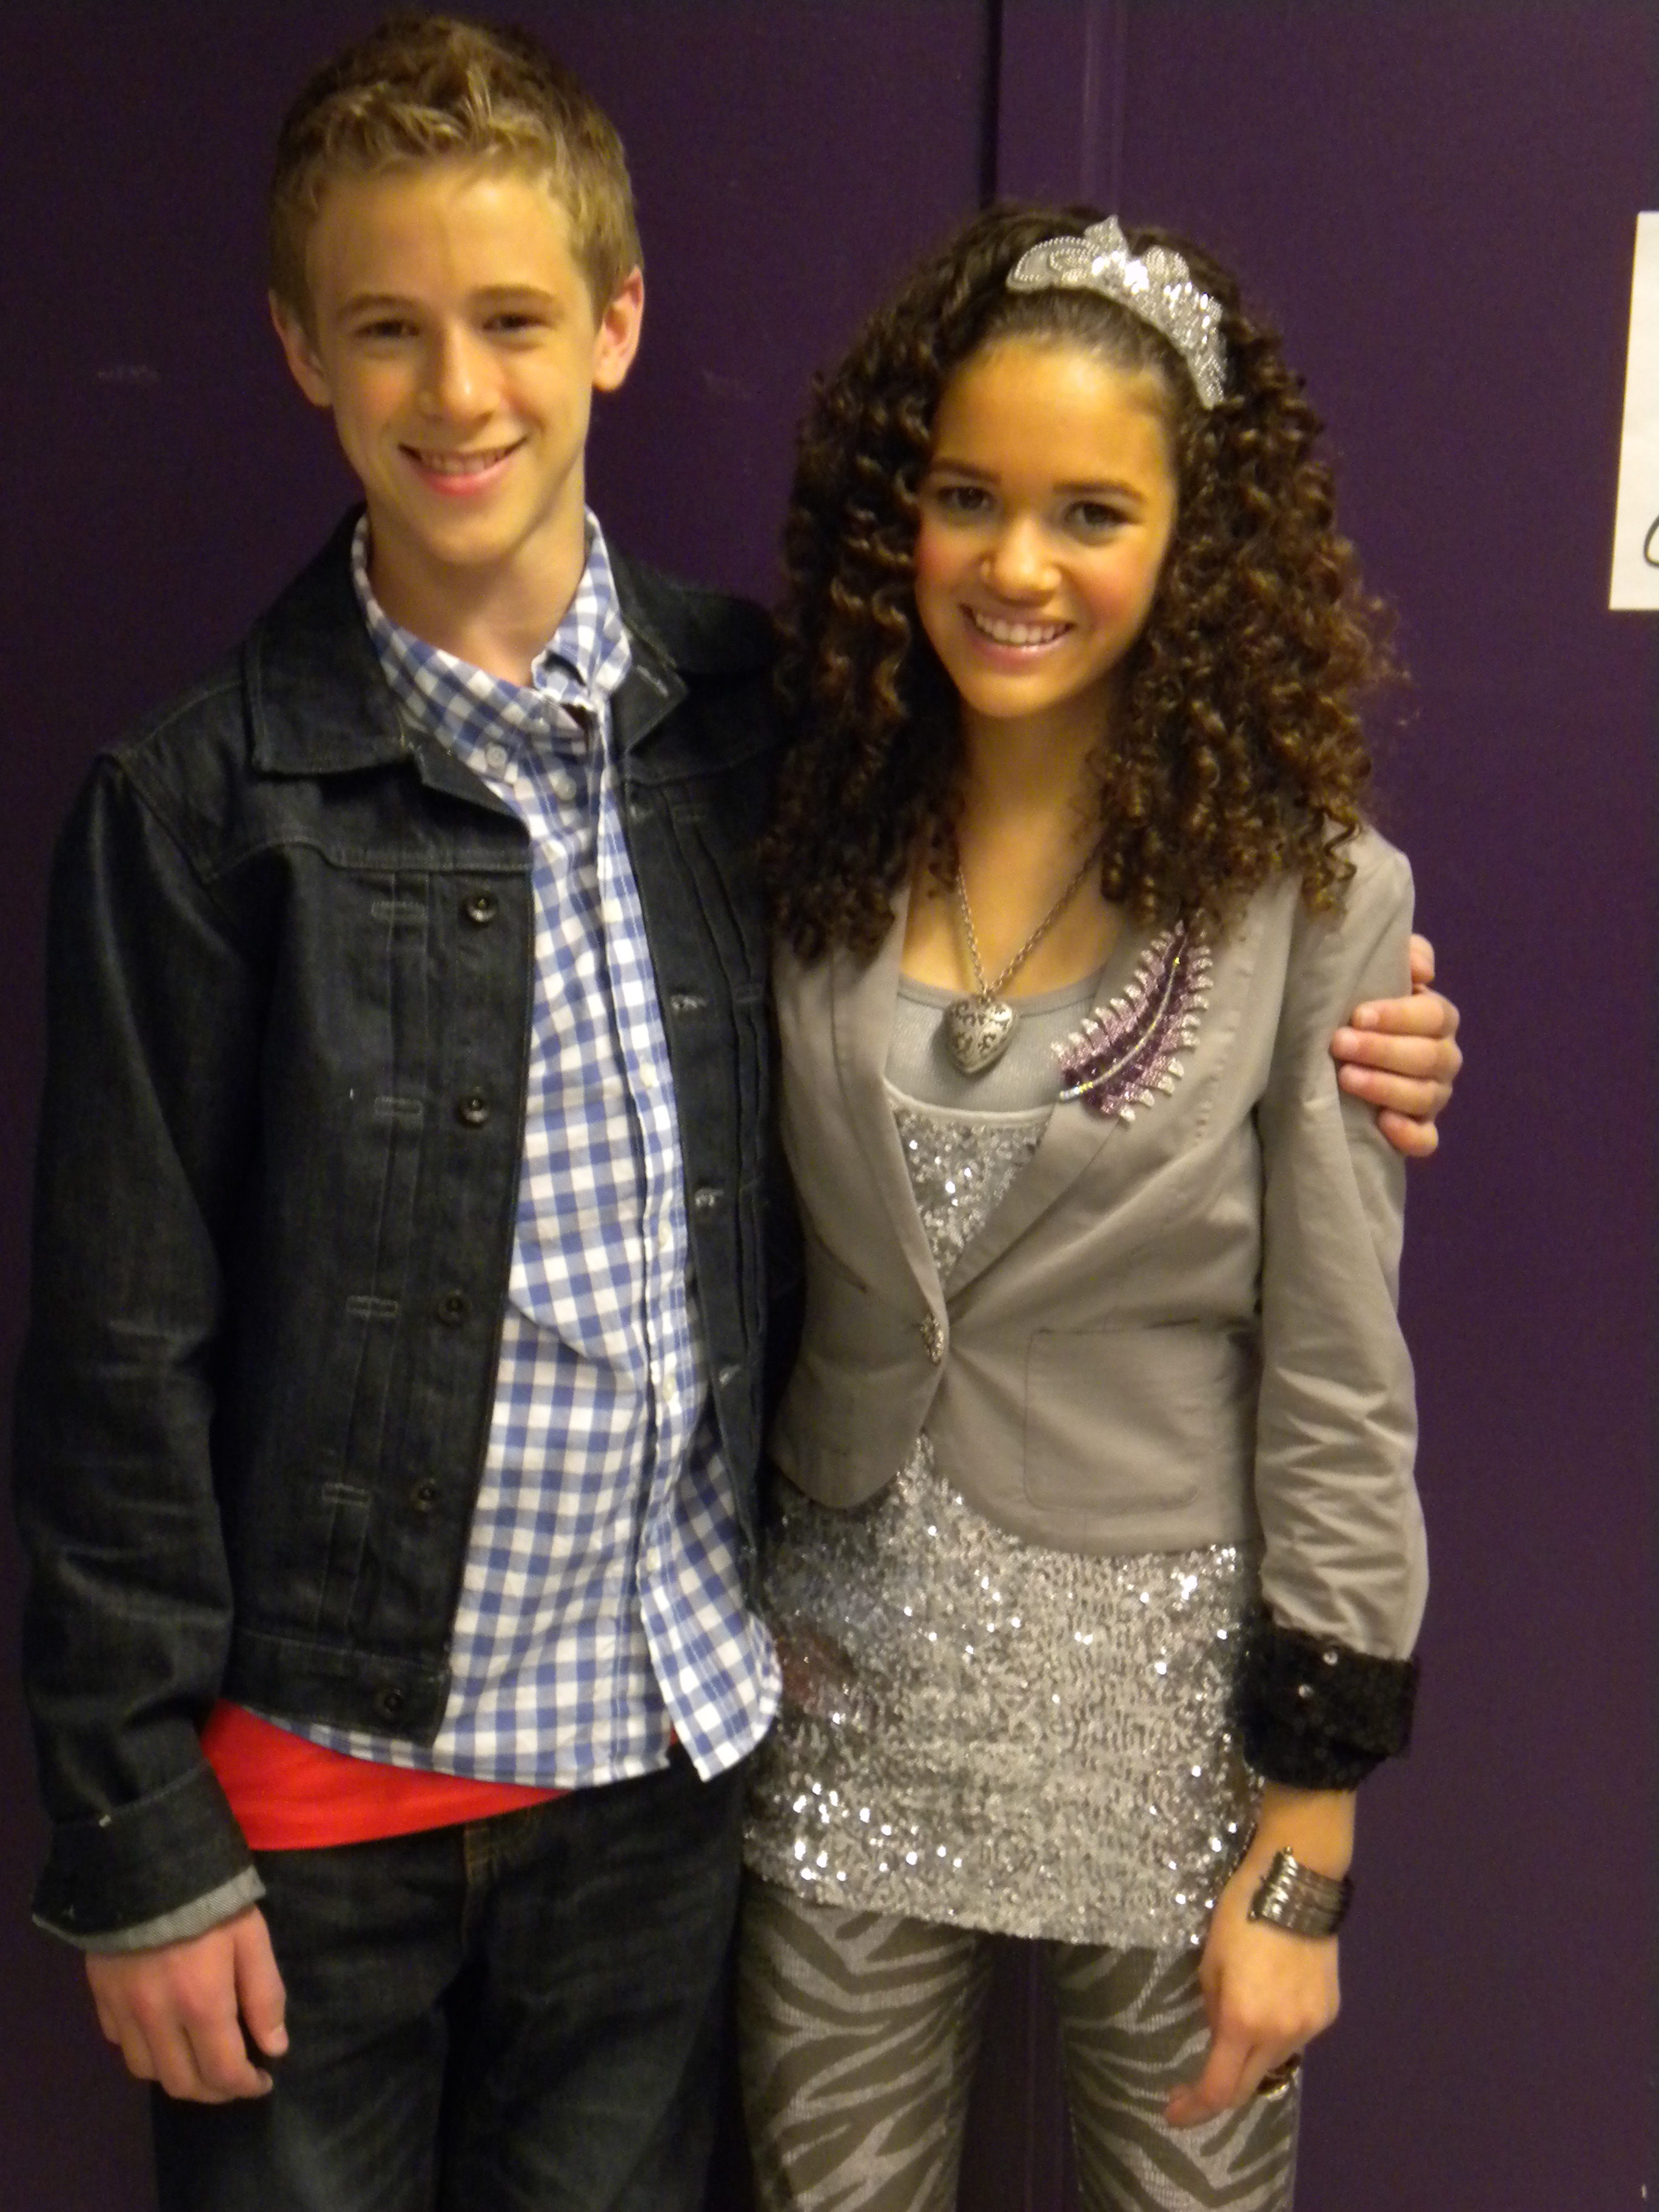 Dale Whibley & Madison Pettis on set at Life With Boys